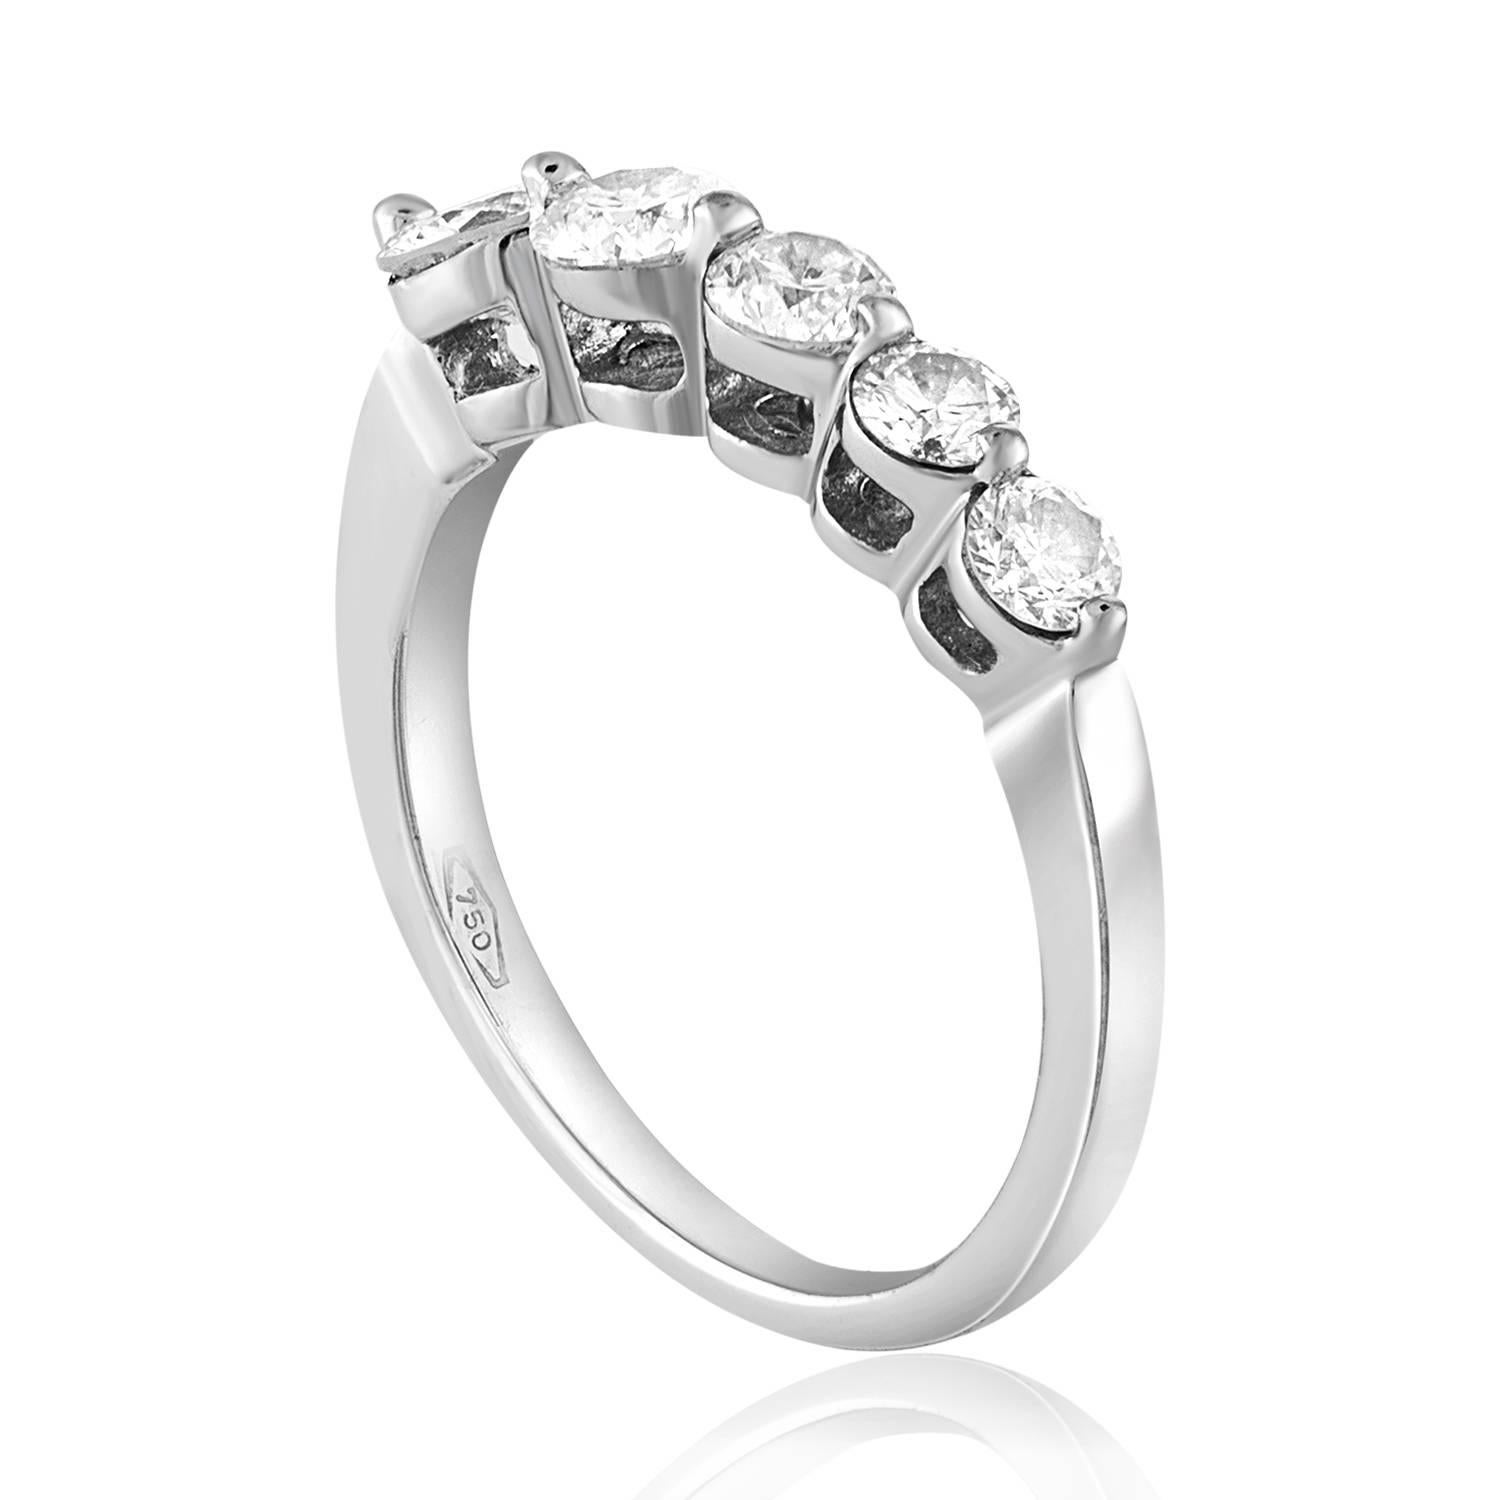 Very Beautiful Graduating Diamond Half Band Ring
The ring is 18K White Gold
There are 5 Round Cut Diamonds prong set
There are 0.70 Carats Total in Diamonds E VS
The ring is a size 4.75, sizable. 
The ring weighs 2.6 grams.